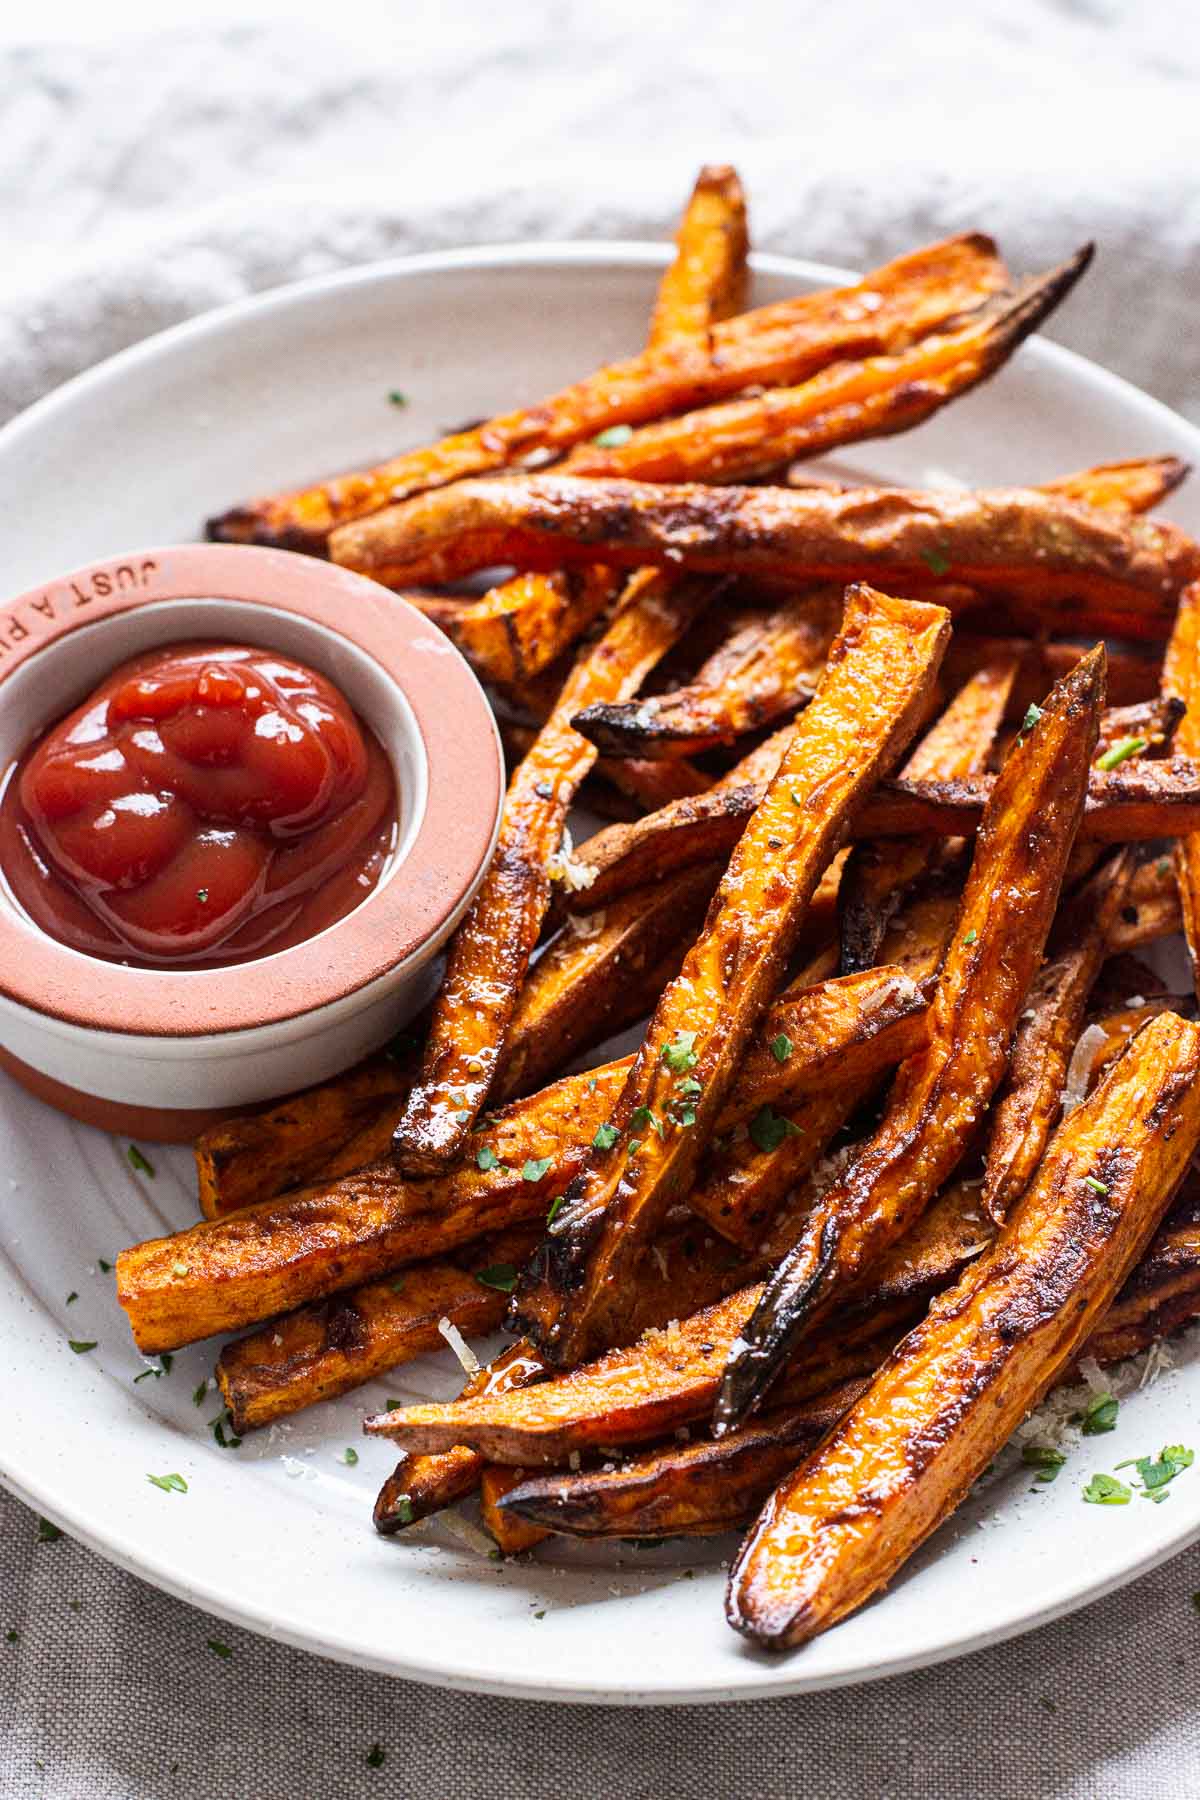 Crispy air fryer sweet potato fries on plate with small bowl of ketchup.